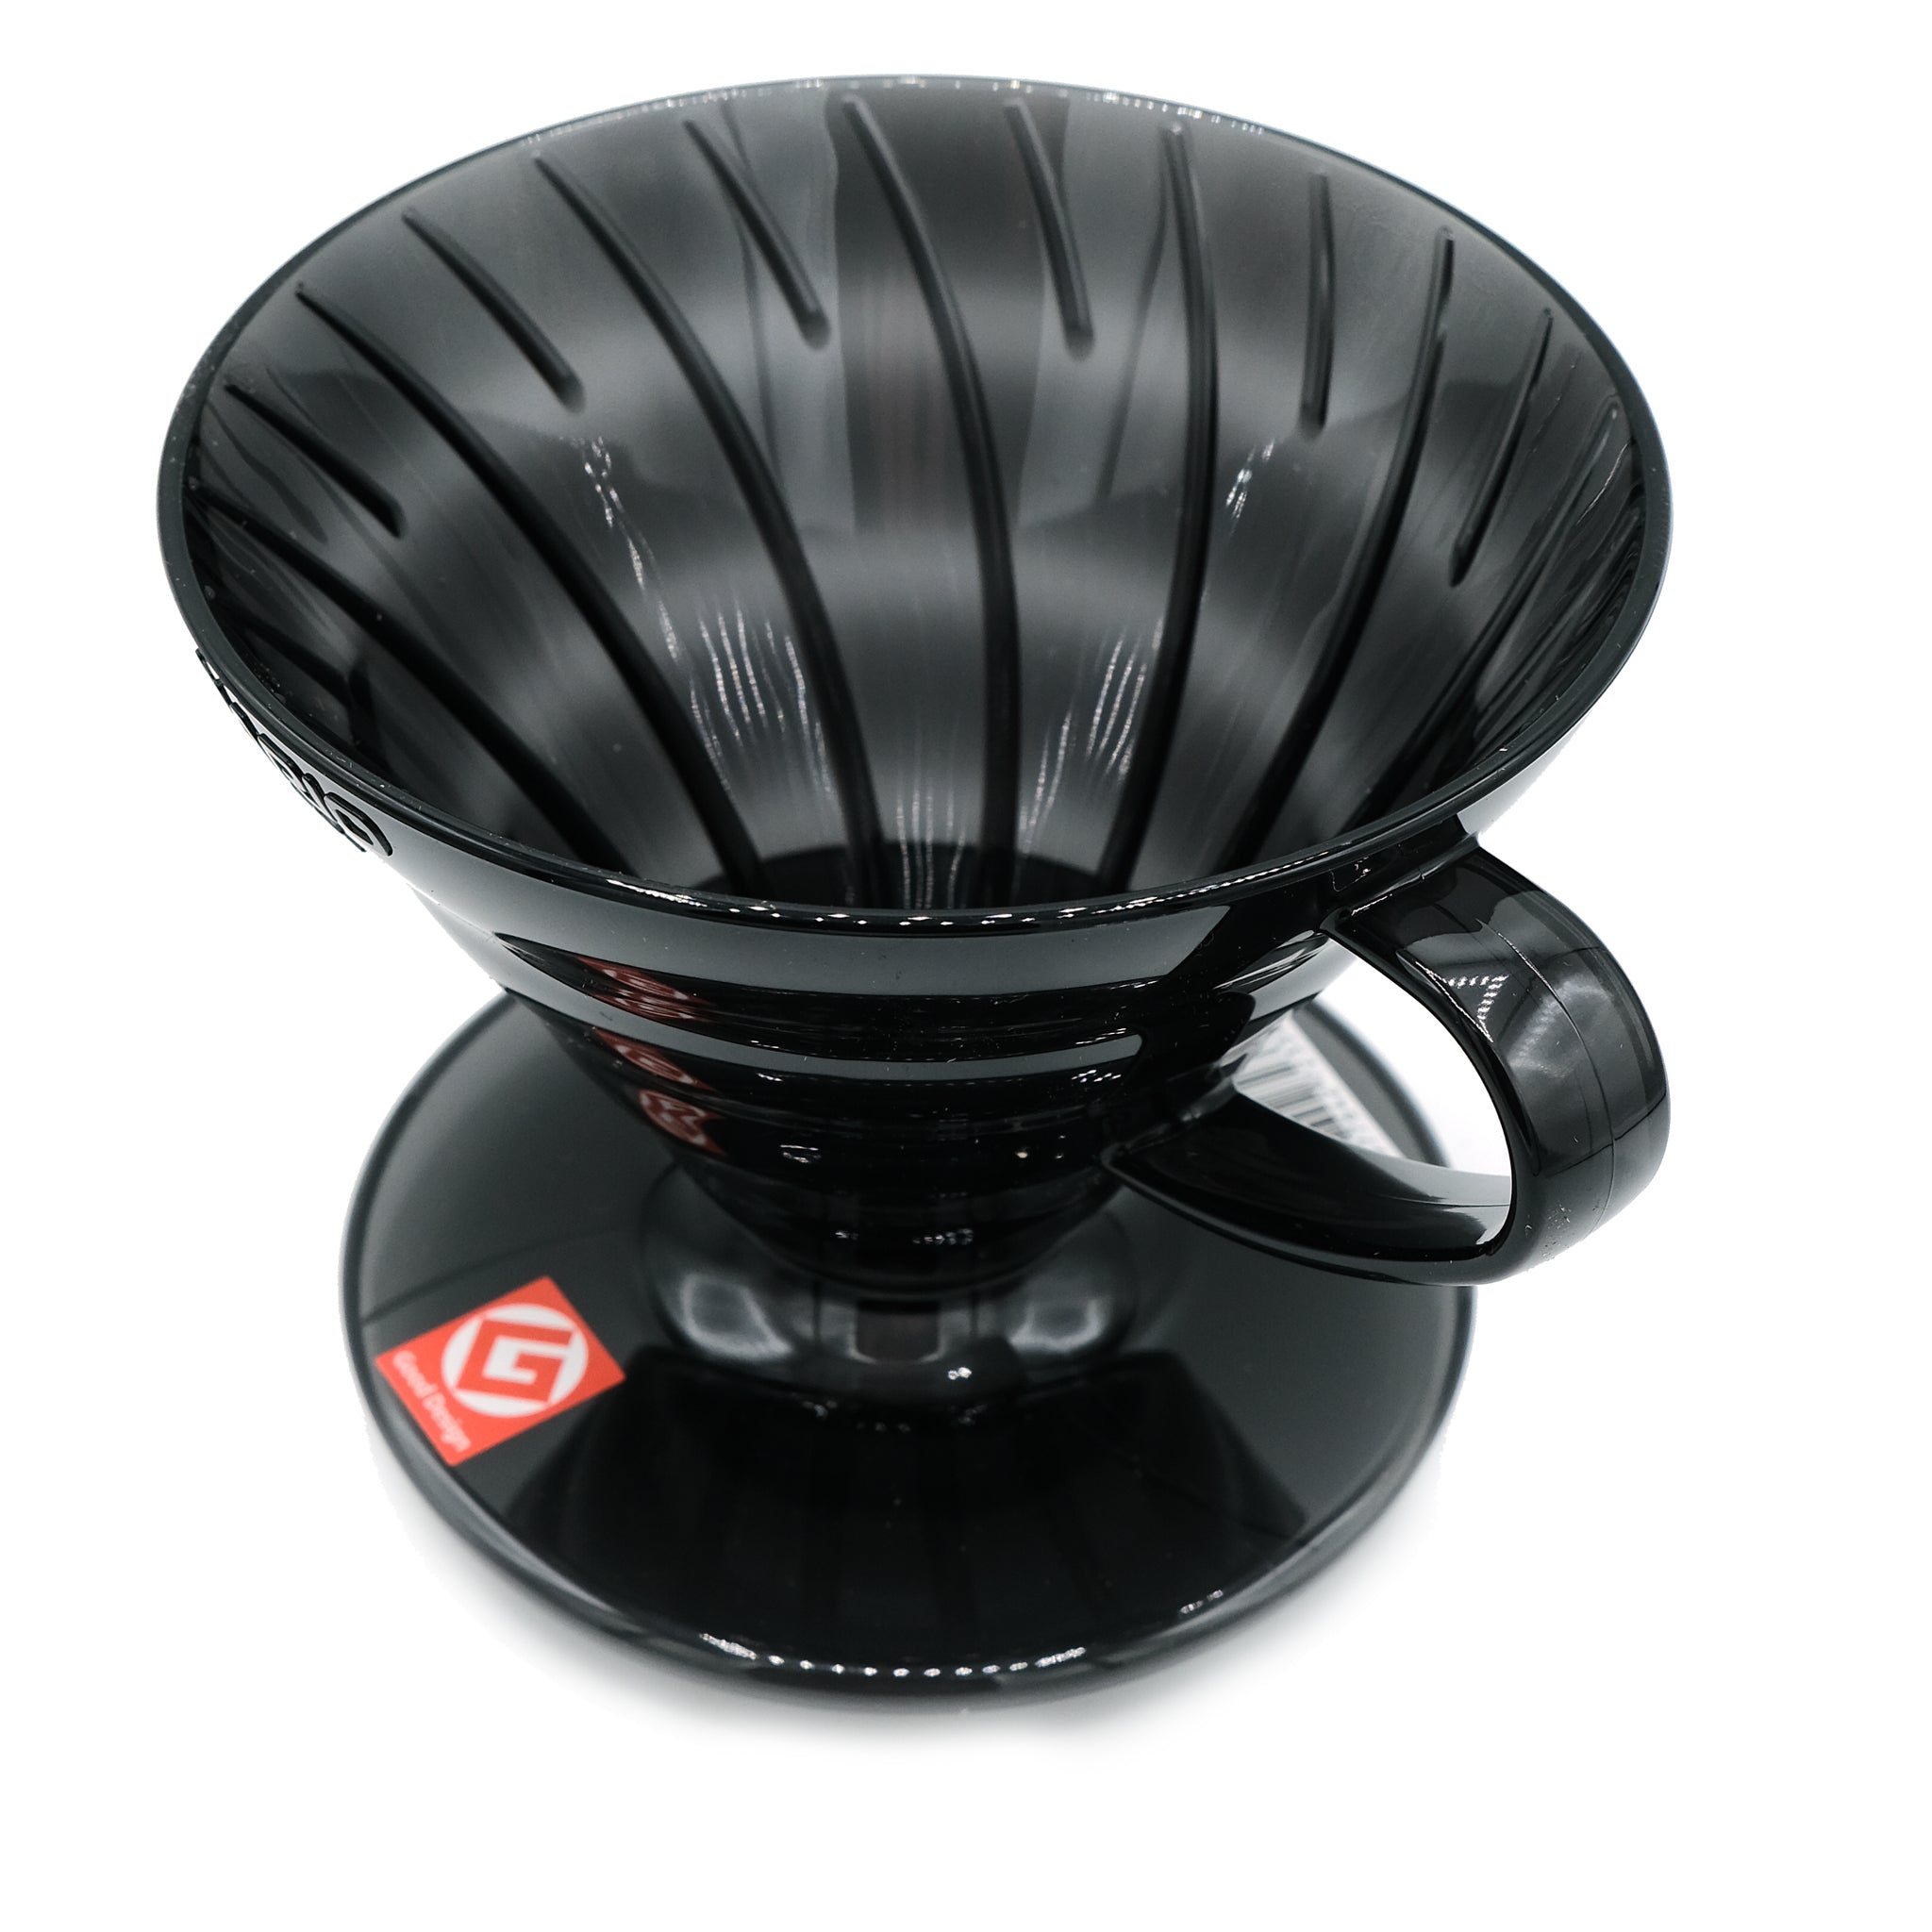 Hario V60 Coffee Dripper Set with Filters